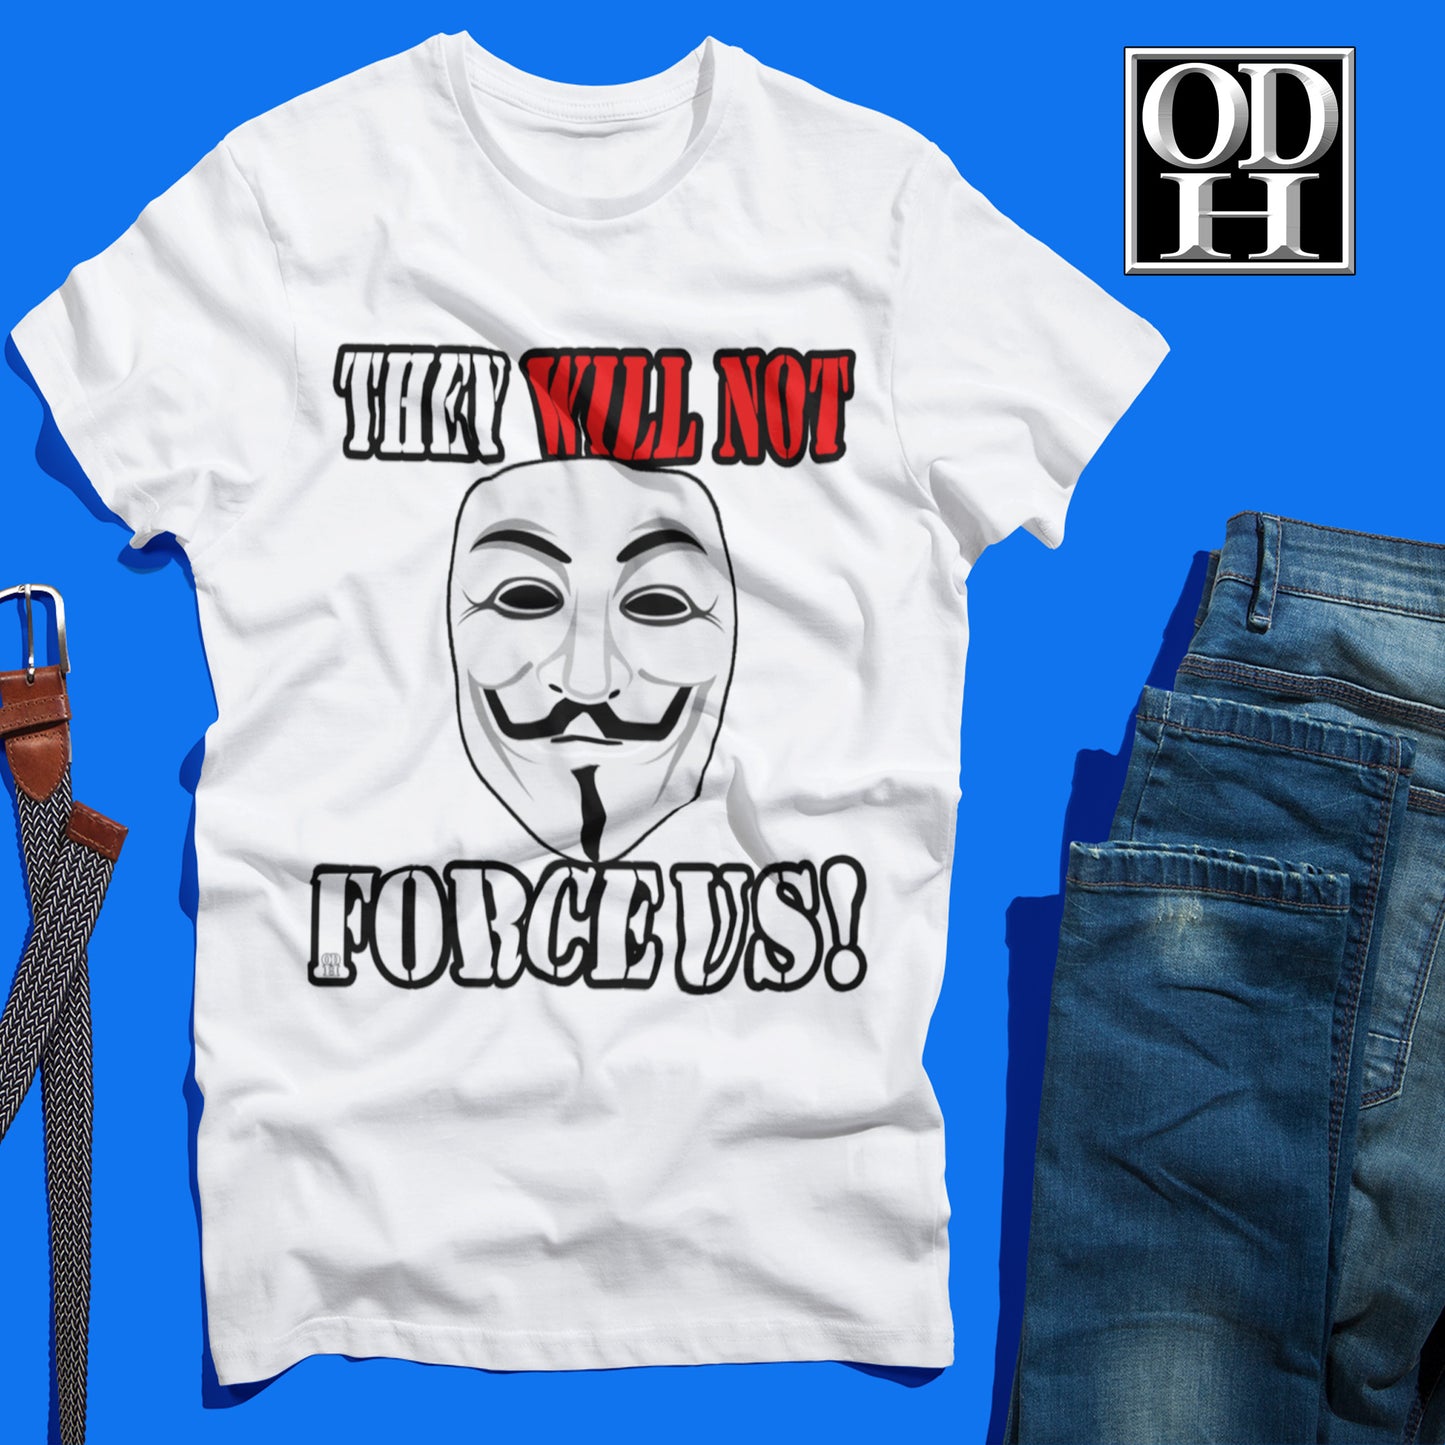 They Will Not Force Us T Shirt Short Sleeve Graphic Unisex Men's Women's Tops